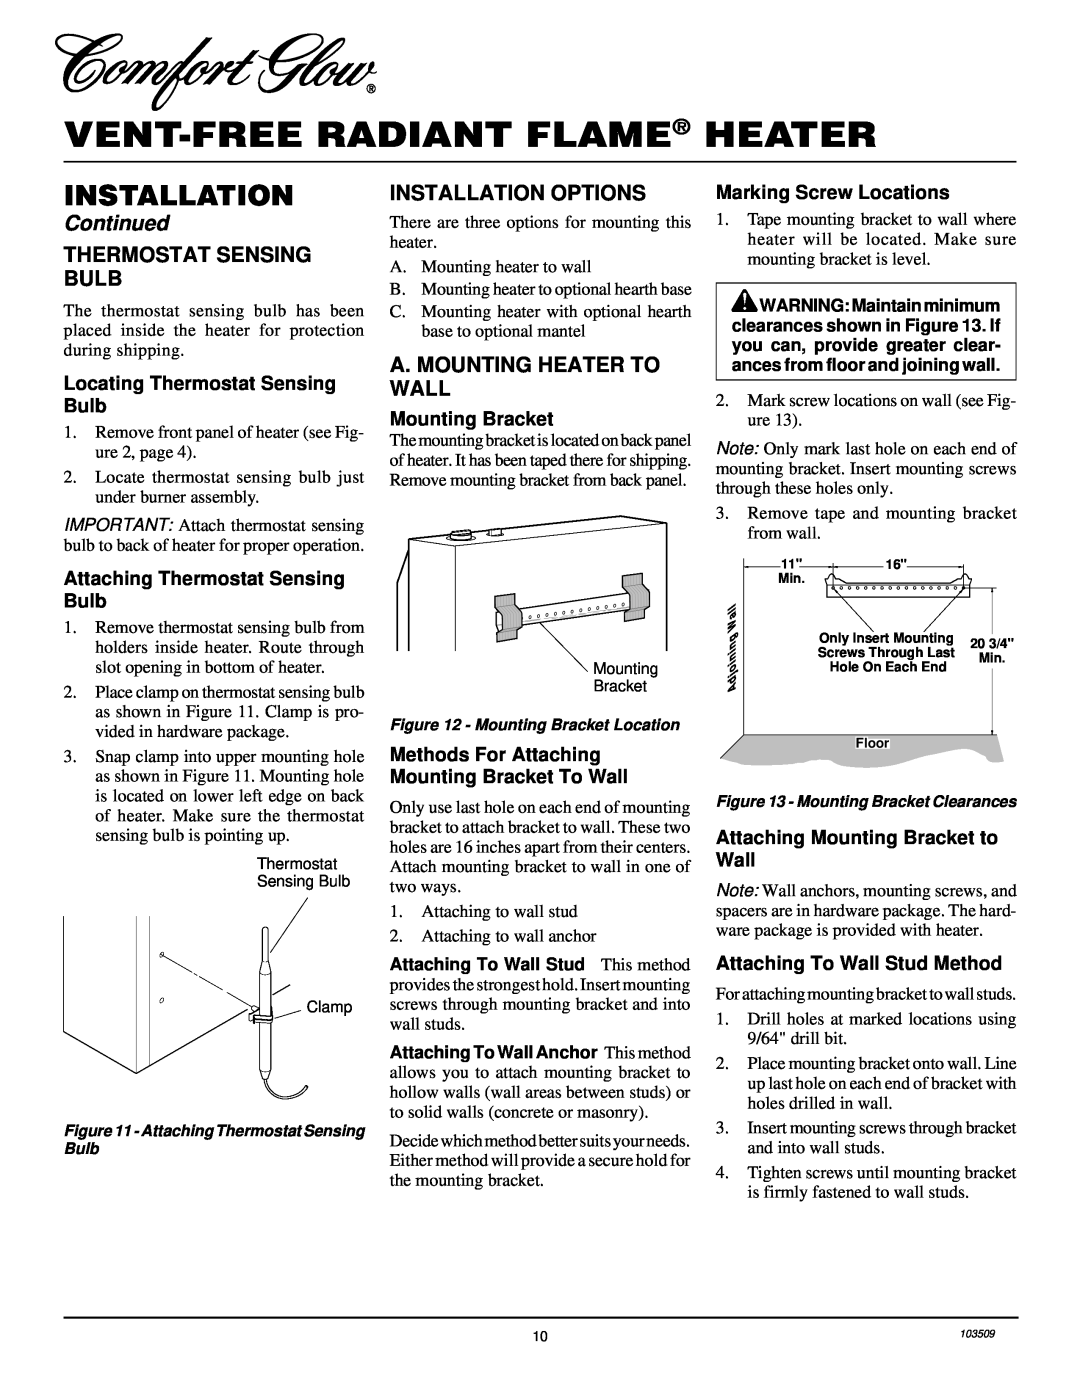 Desa Tech RFP28TC Thermostat Sensing Bulb, Installation Options, A. Mounting Heater To Wall, Mounting Bracket, Continued 